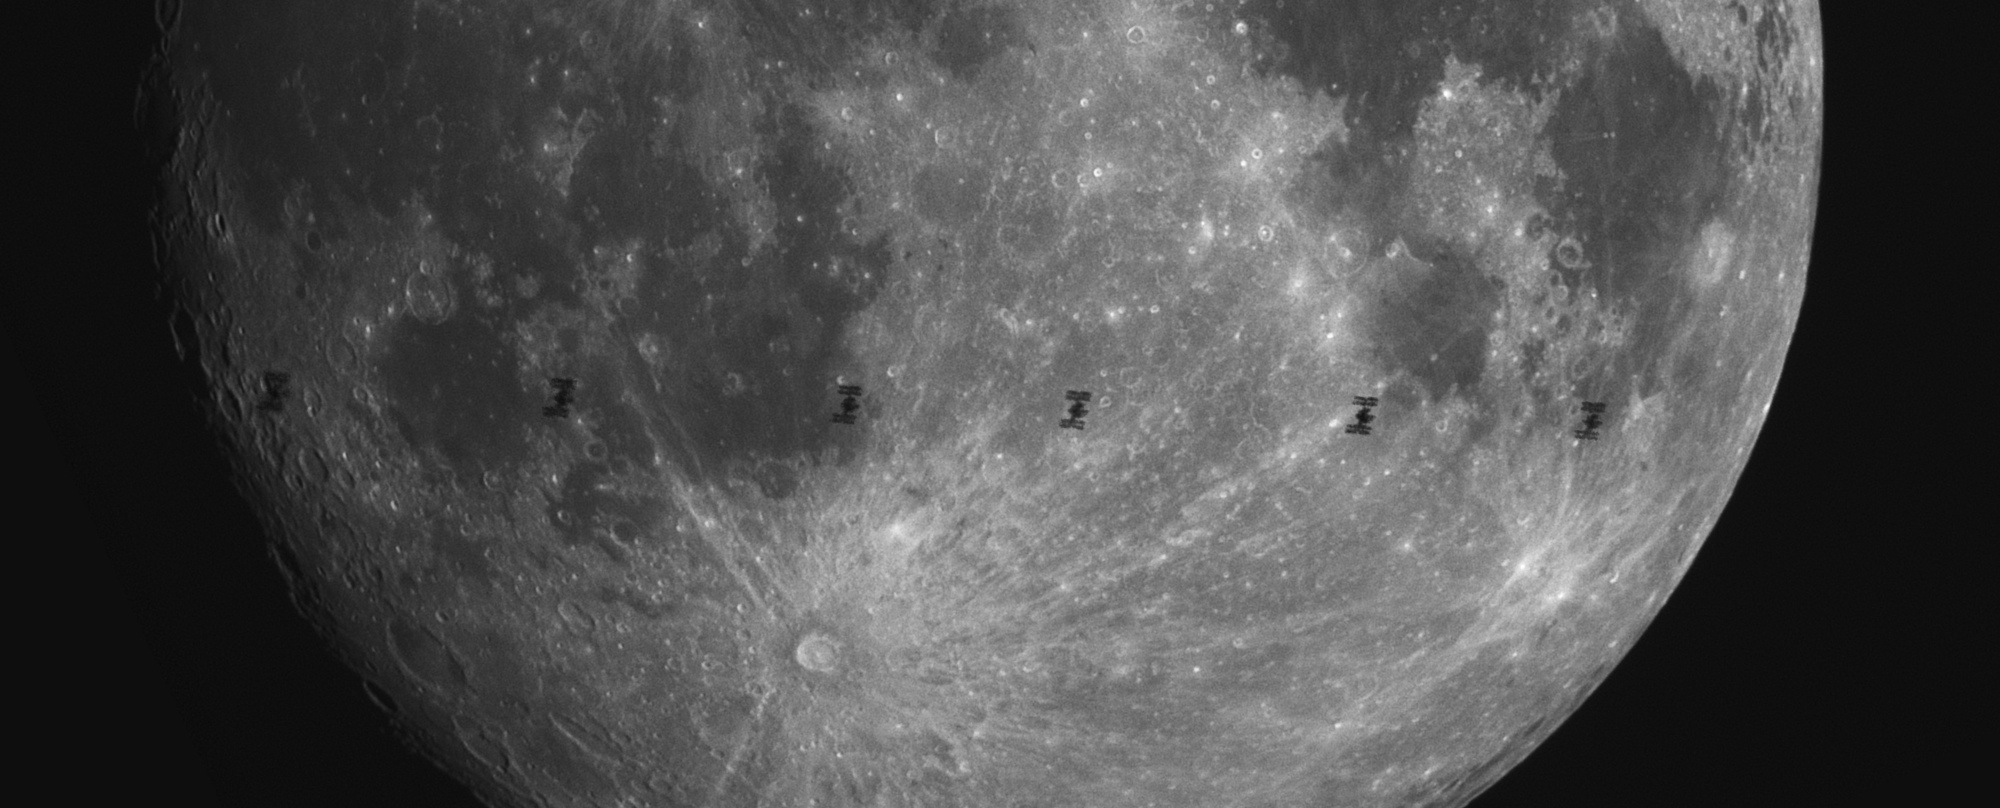 ISS transit over the Moon